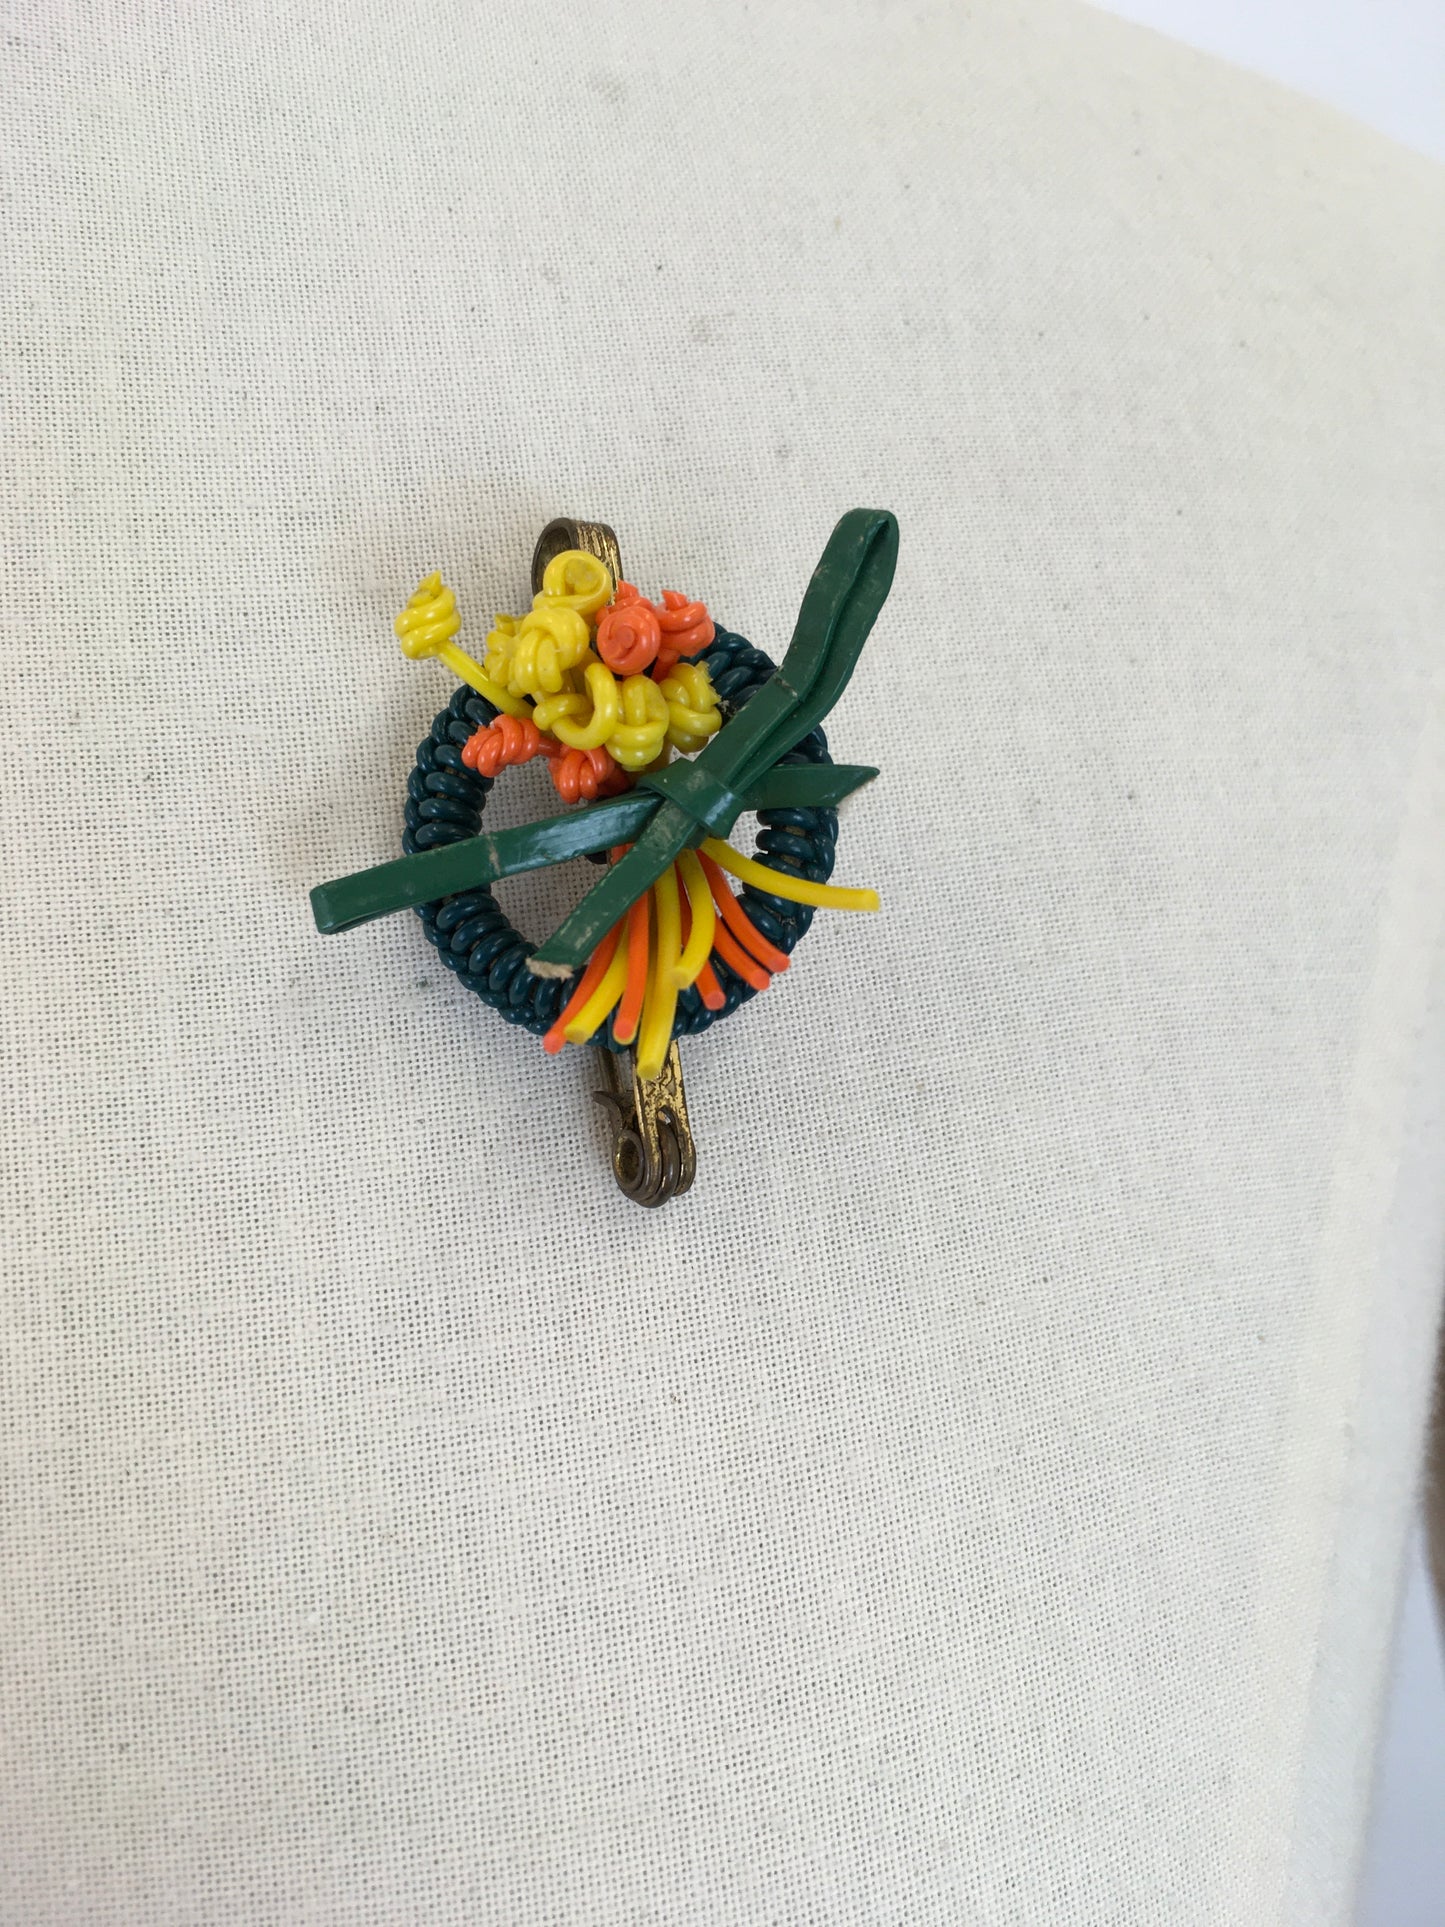 Original 1940s Make Do and Mend Telephone Wire Brooch - In Bright Yellow, Orange and Green